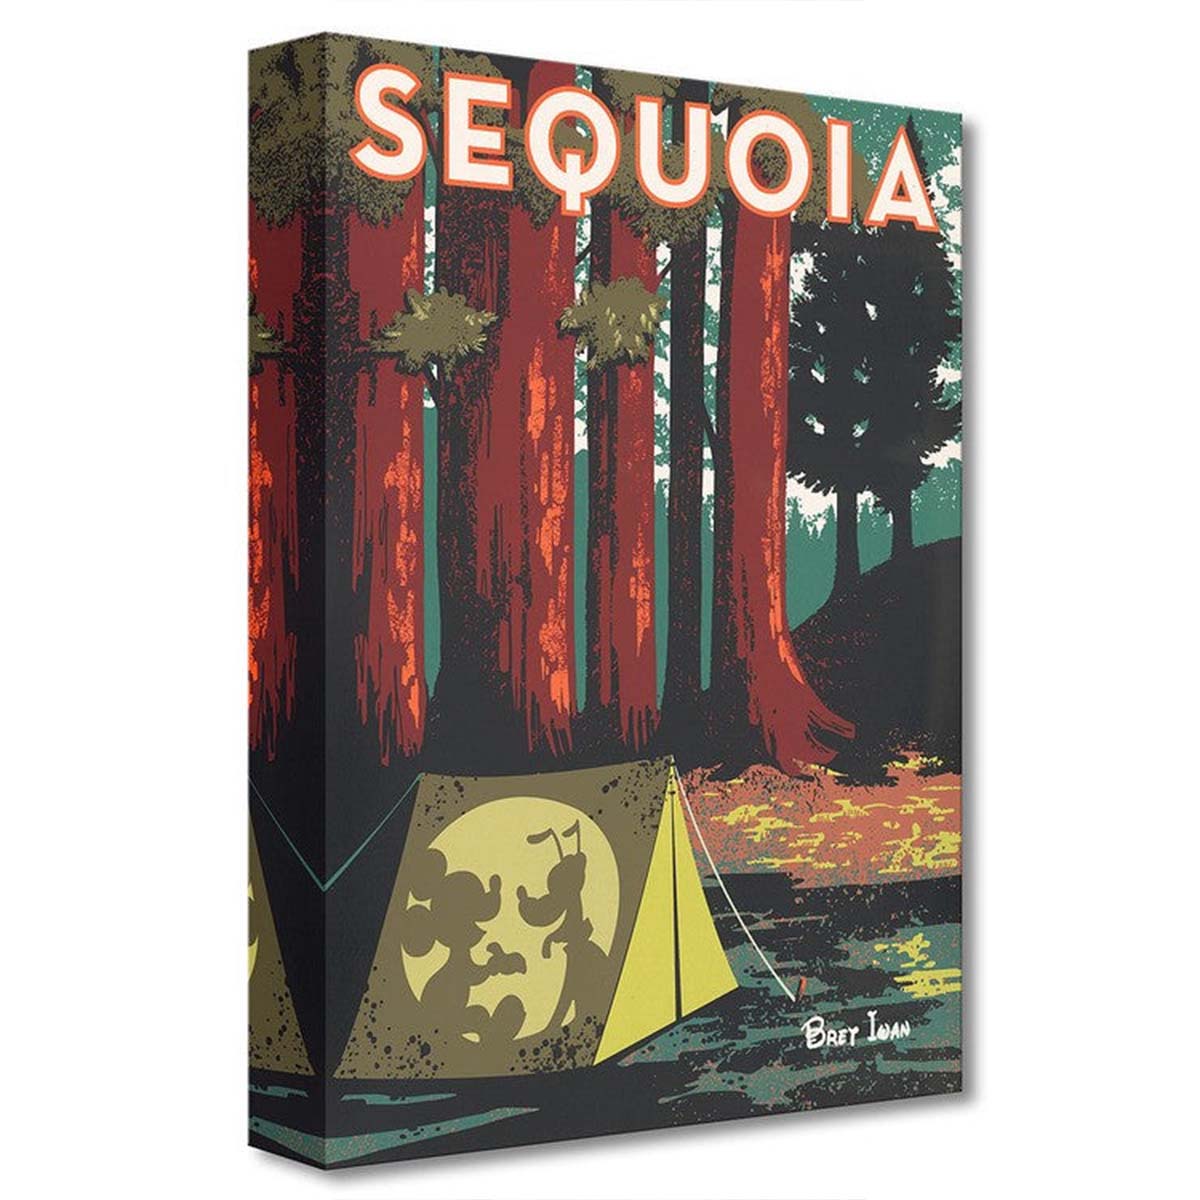 Bret Iwan Disney "Sequoia" Limited Edition Canvas Giclee